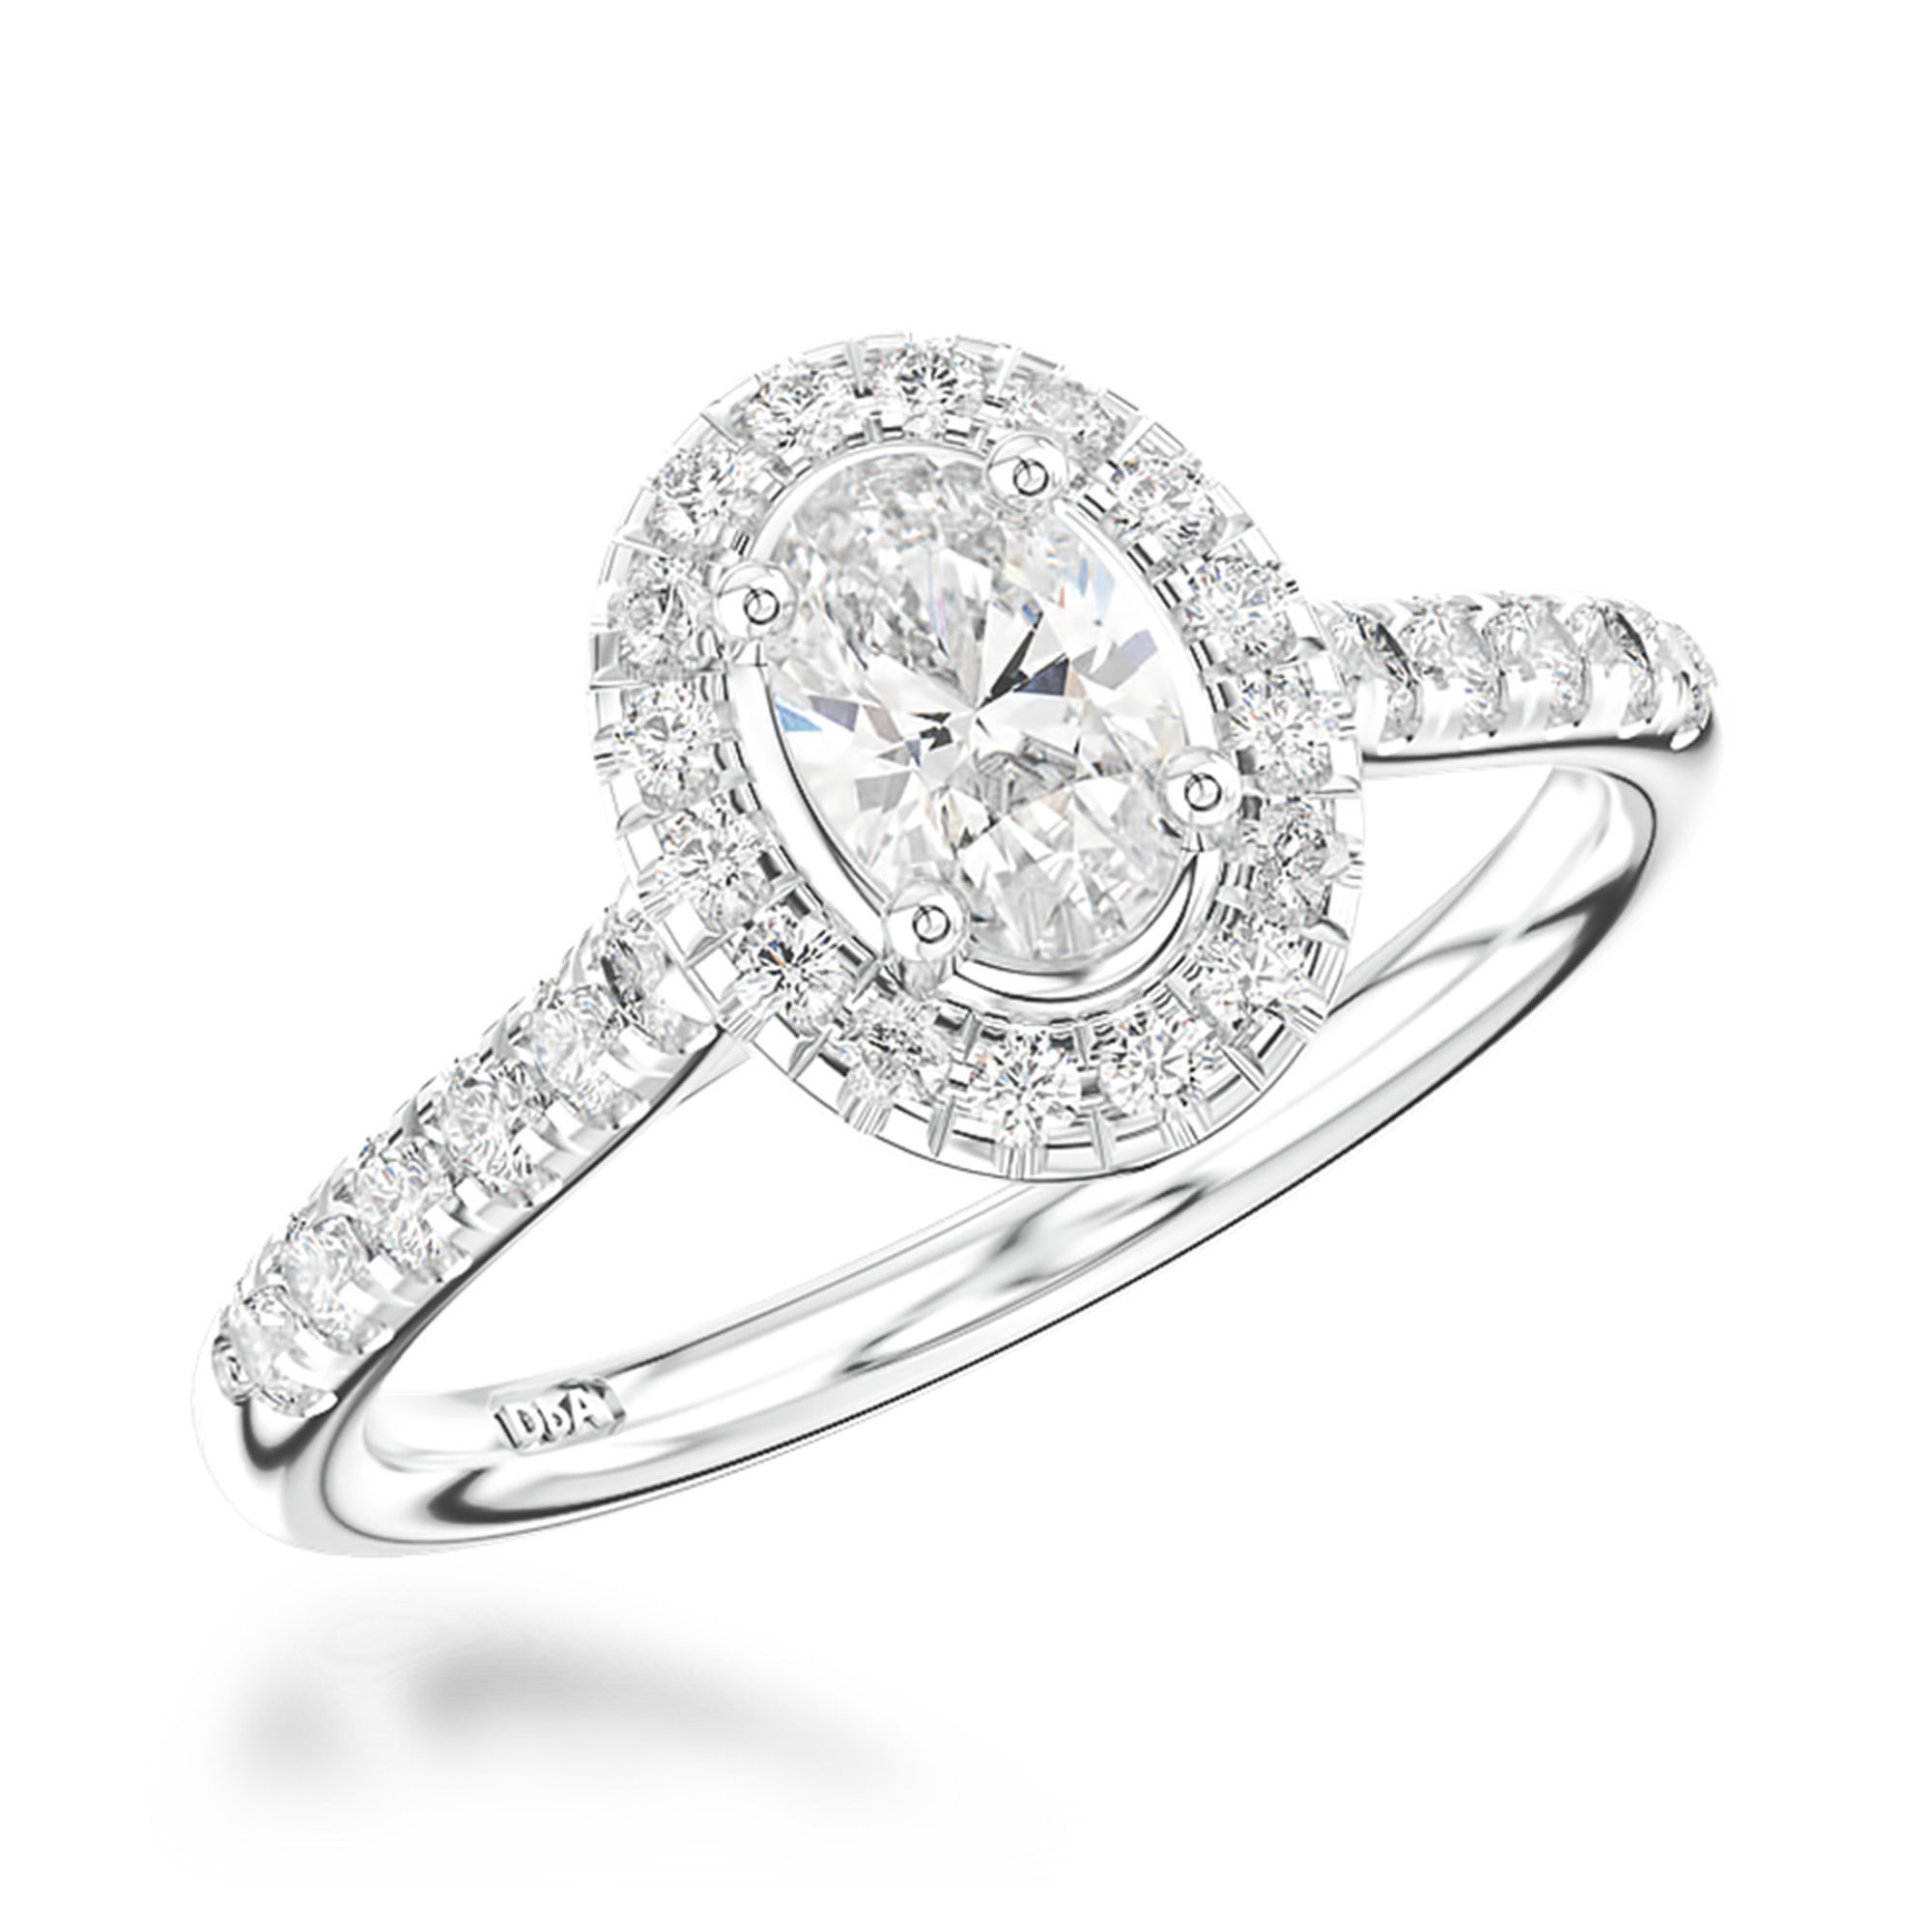 Celestial 0.50ct Diamond Cluster Ring Oval Cut, Claw Set_1